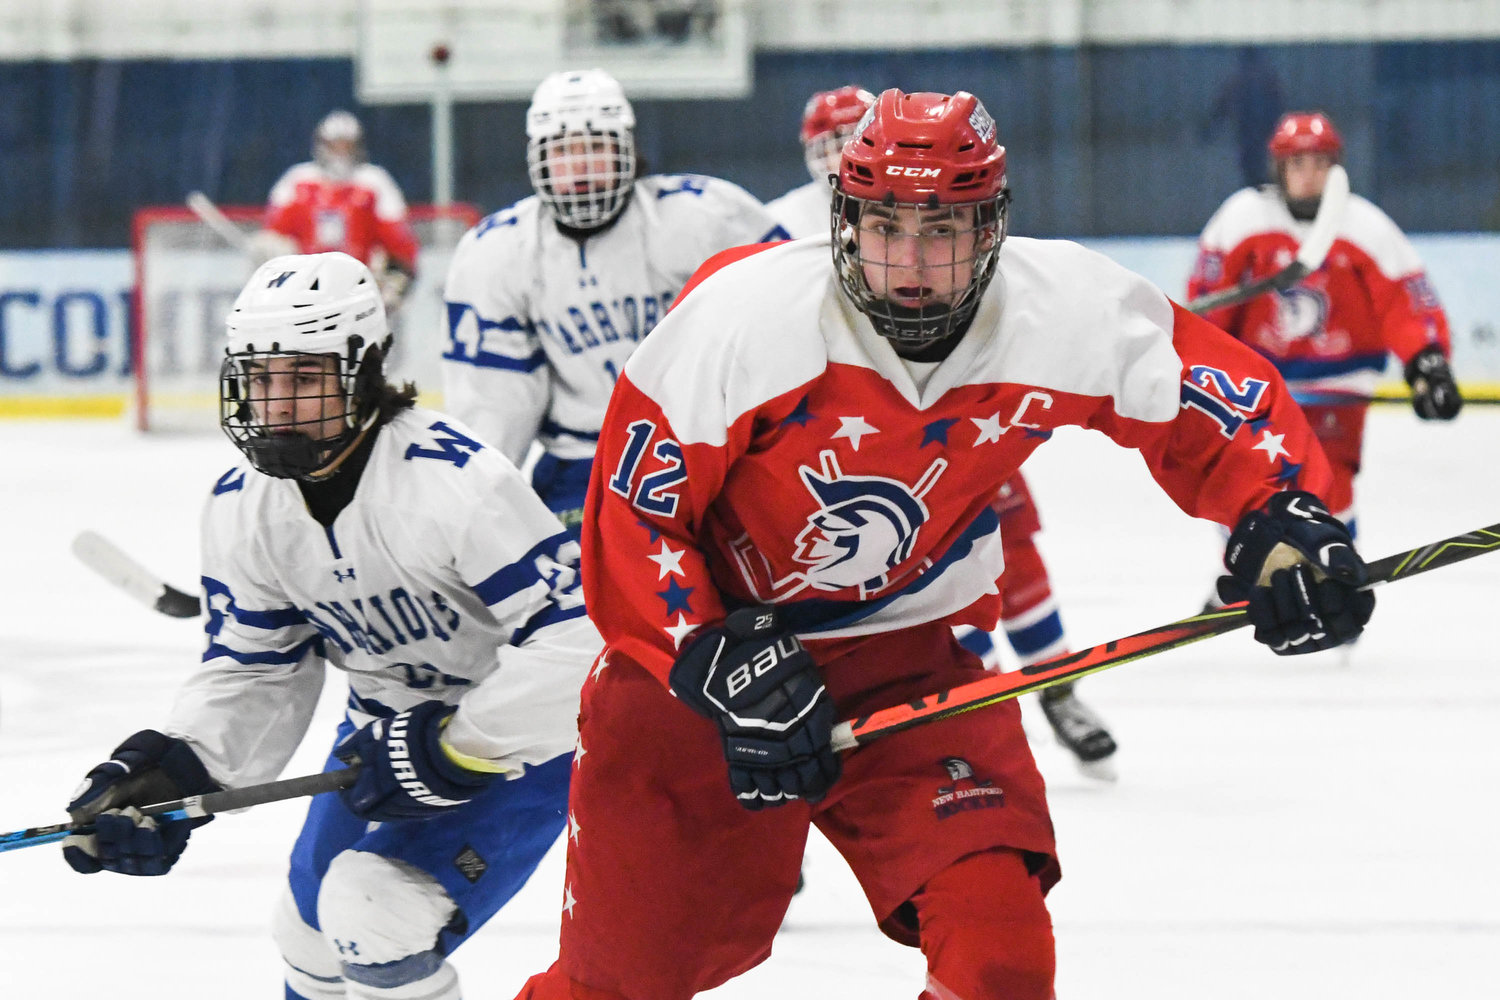 MAKING A PLAY — New Hartford player Will Gall (12) races toward the puck during the game against Whitesboro on Tuesday at Whitestown Ice Rink. He had a goal and two assists in New Hartford’s win. The Spartans won 5-2.